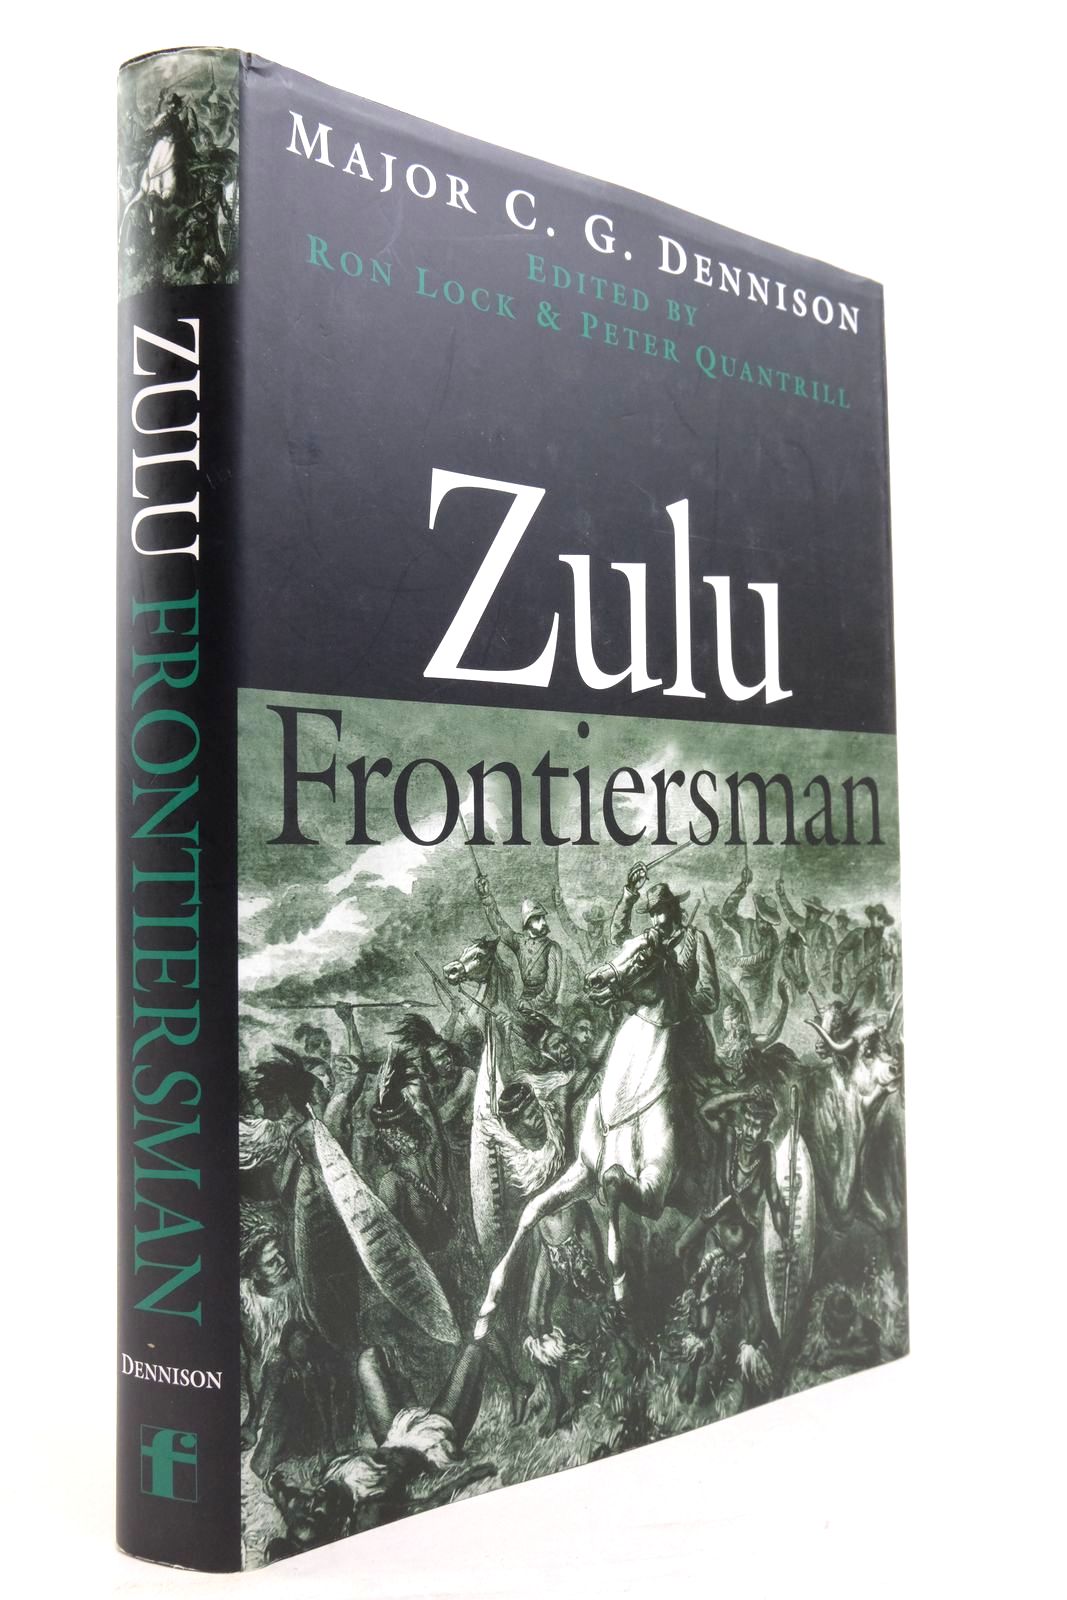 Photo of ZULU FRONTIERSMAN written by Dennison, C.G.
Lock, Ron
Quantrill, Peter published by Frontline Books (STOCK CODE: 2138132)  for sale by Stella & Rose's Books